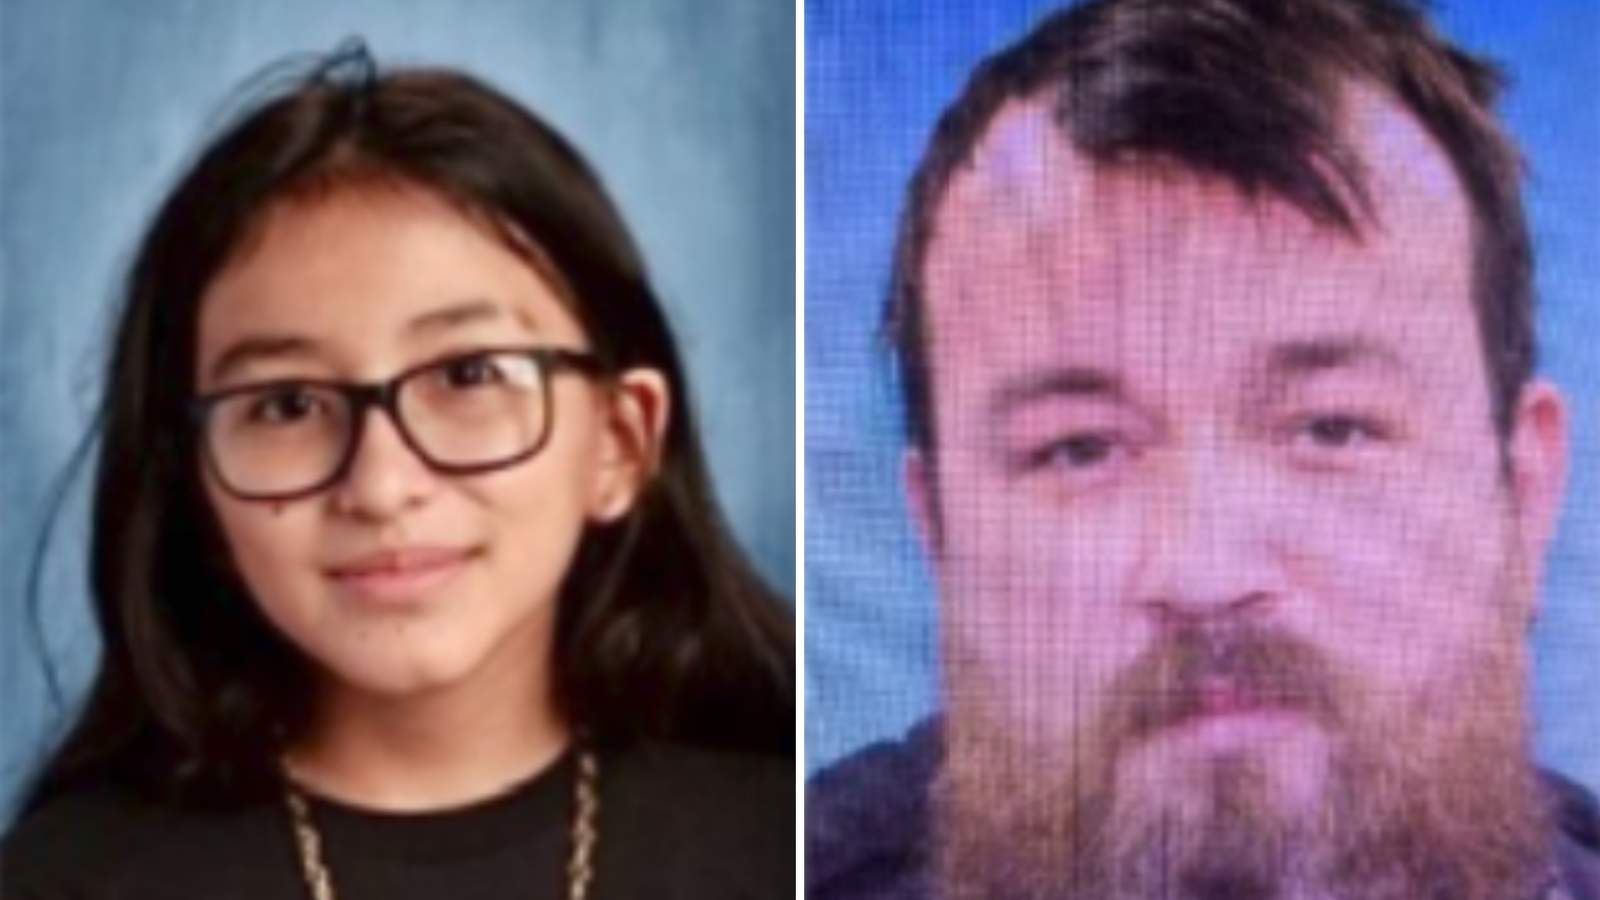 Missing 10-year-old found safe; father charged in death of child’s mother, police say